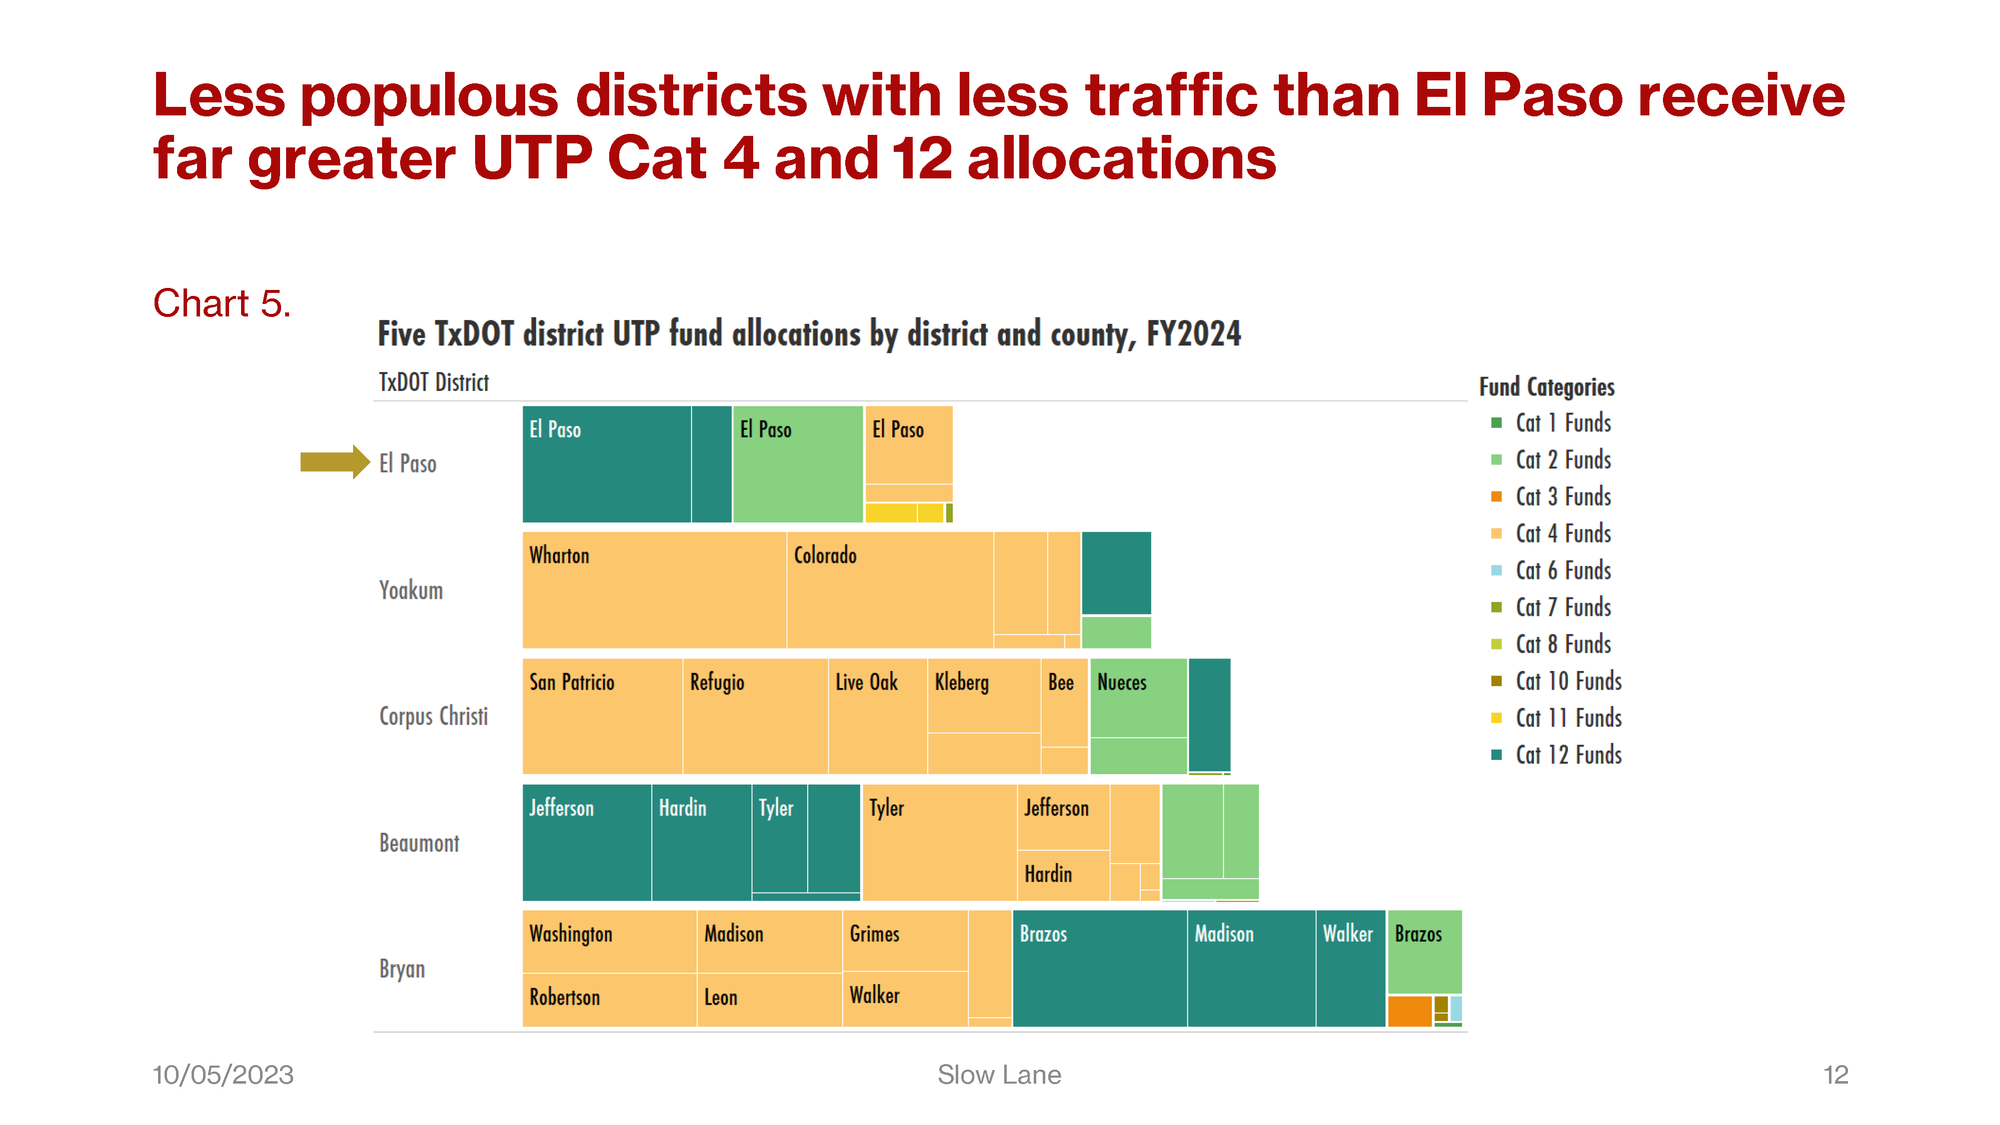 A deeper look into the UTP Funding Analysis Report ("Slow Lane") by the El Paso Chamber Mobility Coalition